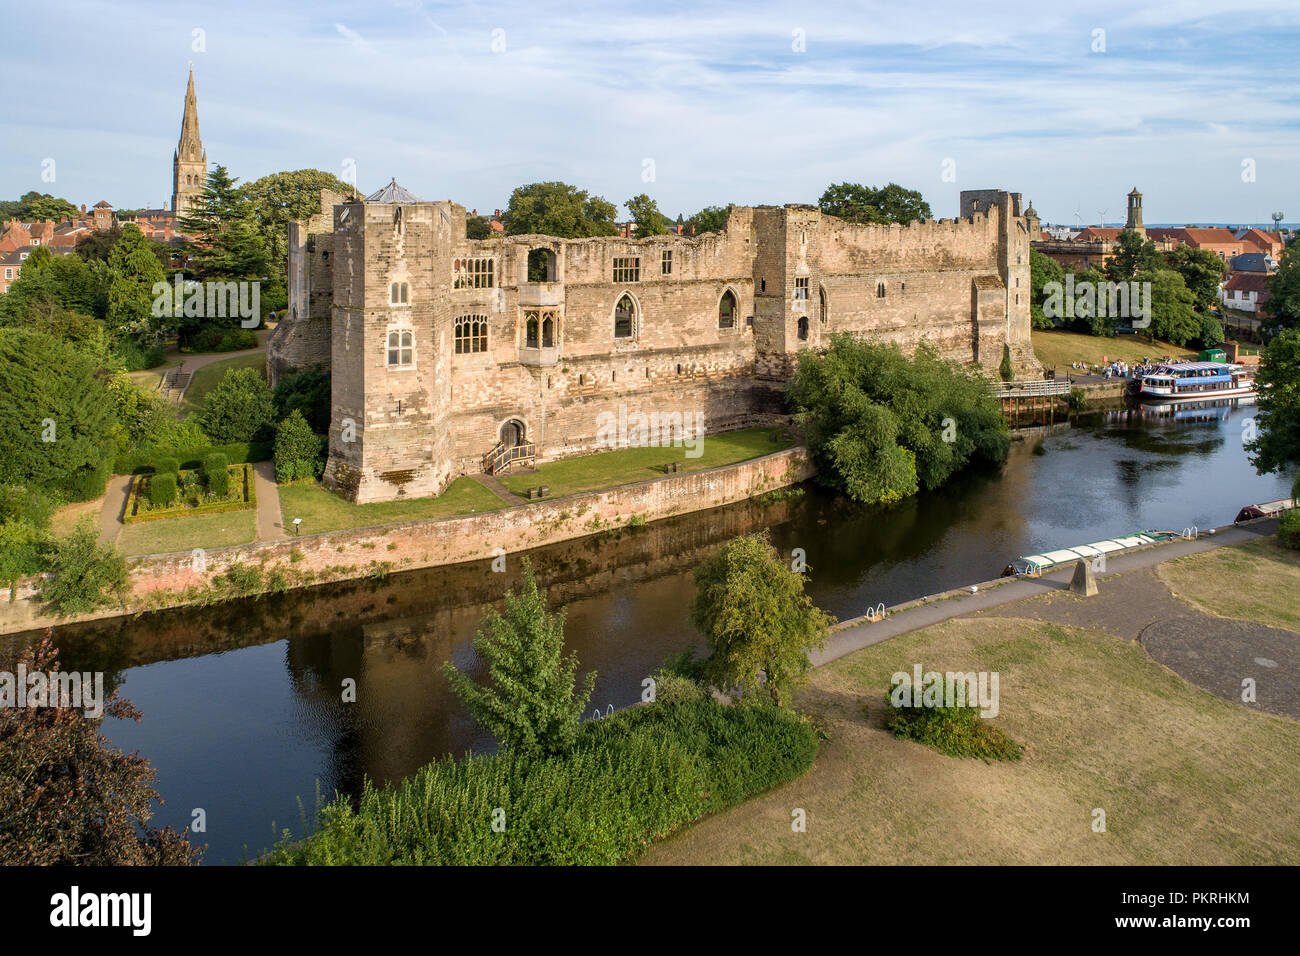 Ruins of medieval Gothic castle in Newark on Trent, near Nottingham, Nottinghamshire, England, UK. Aerial view with Trent River in sunset light. Stock Photo